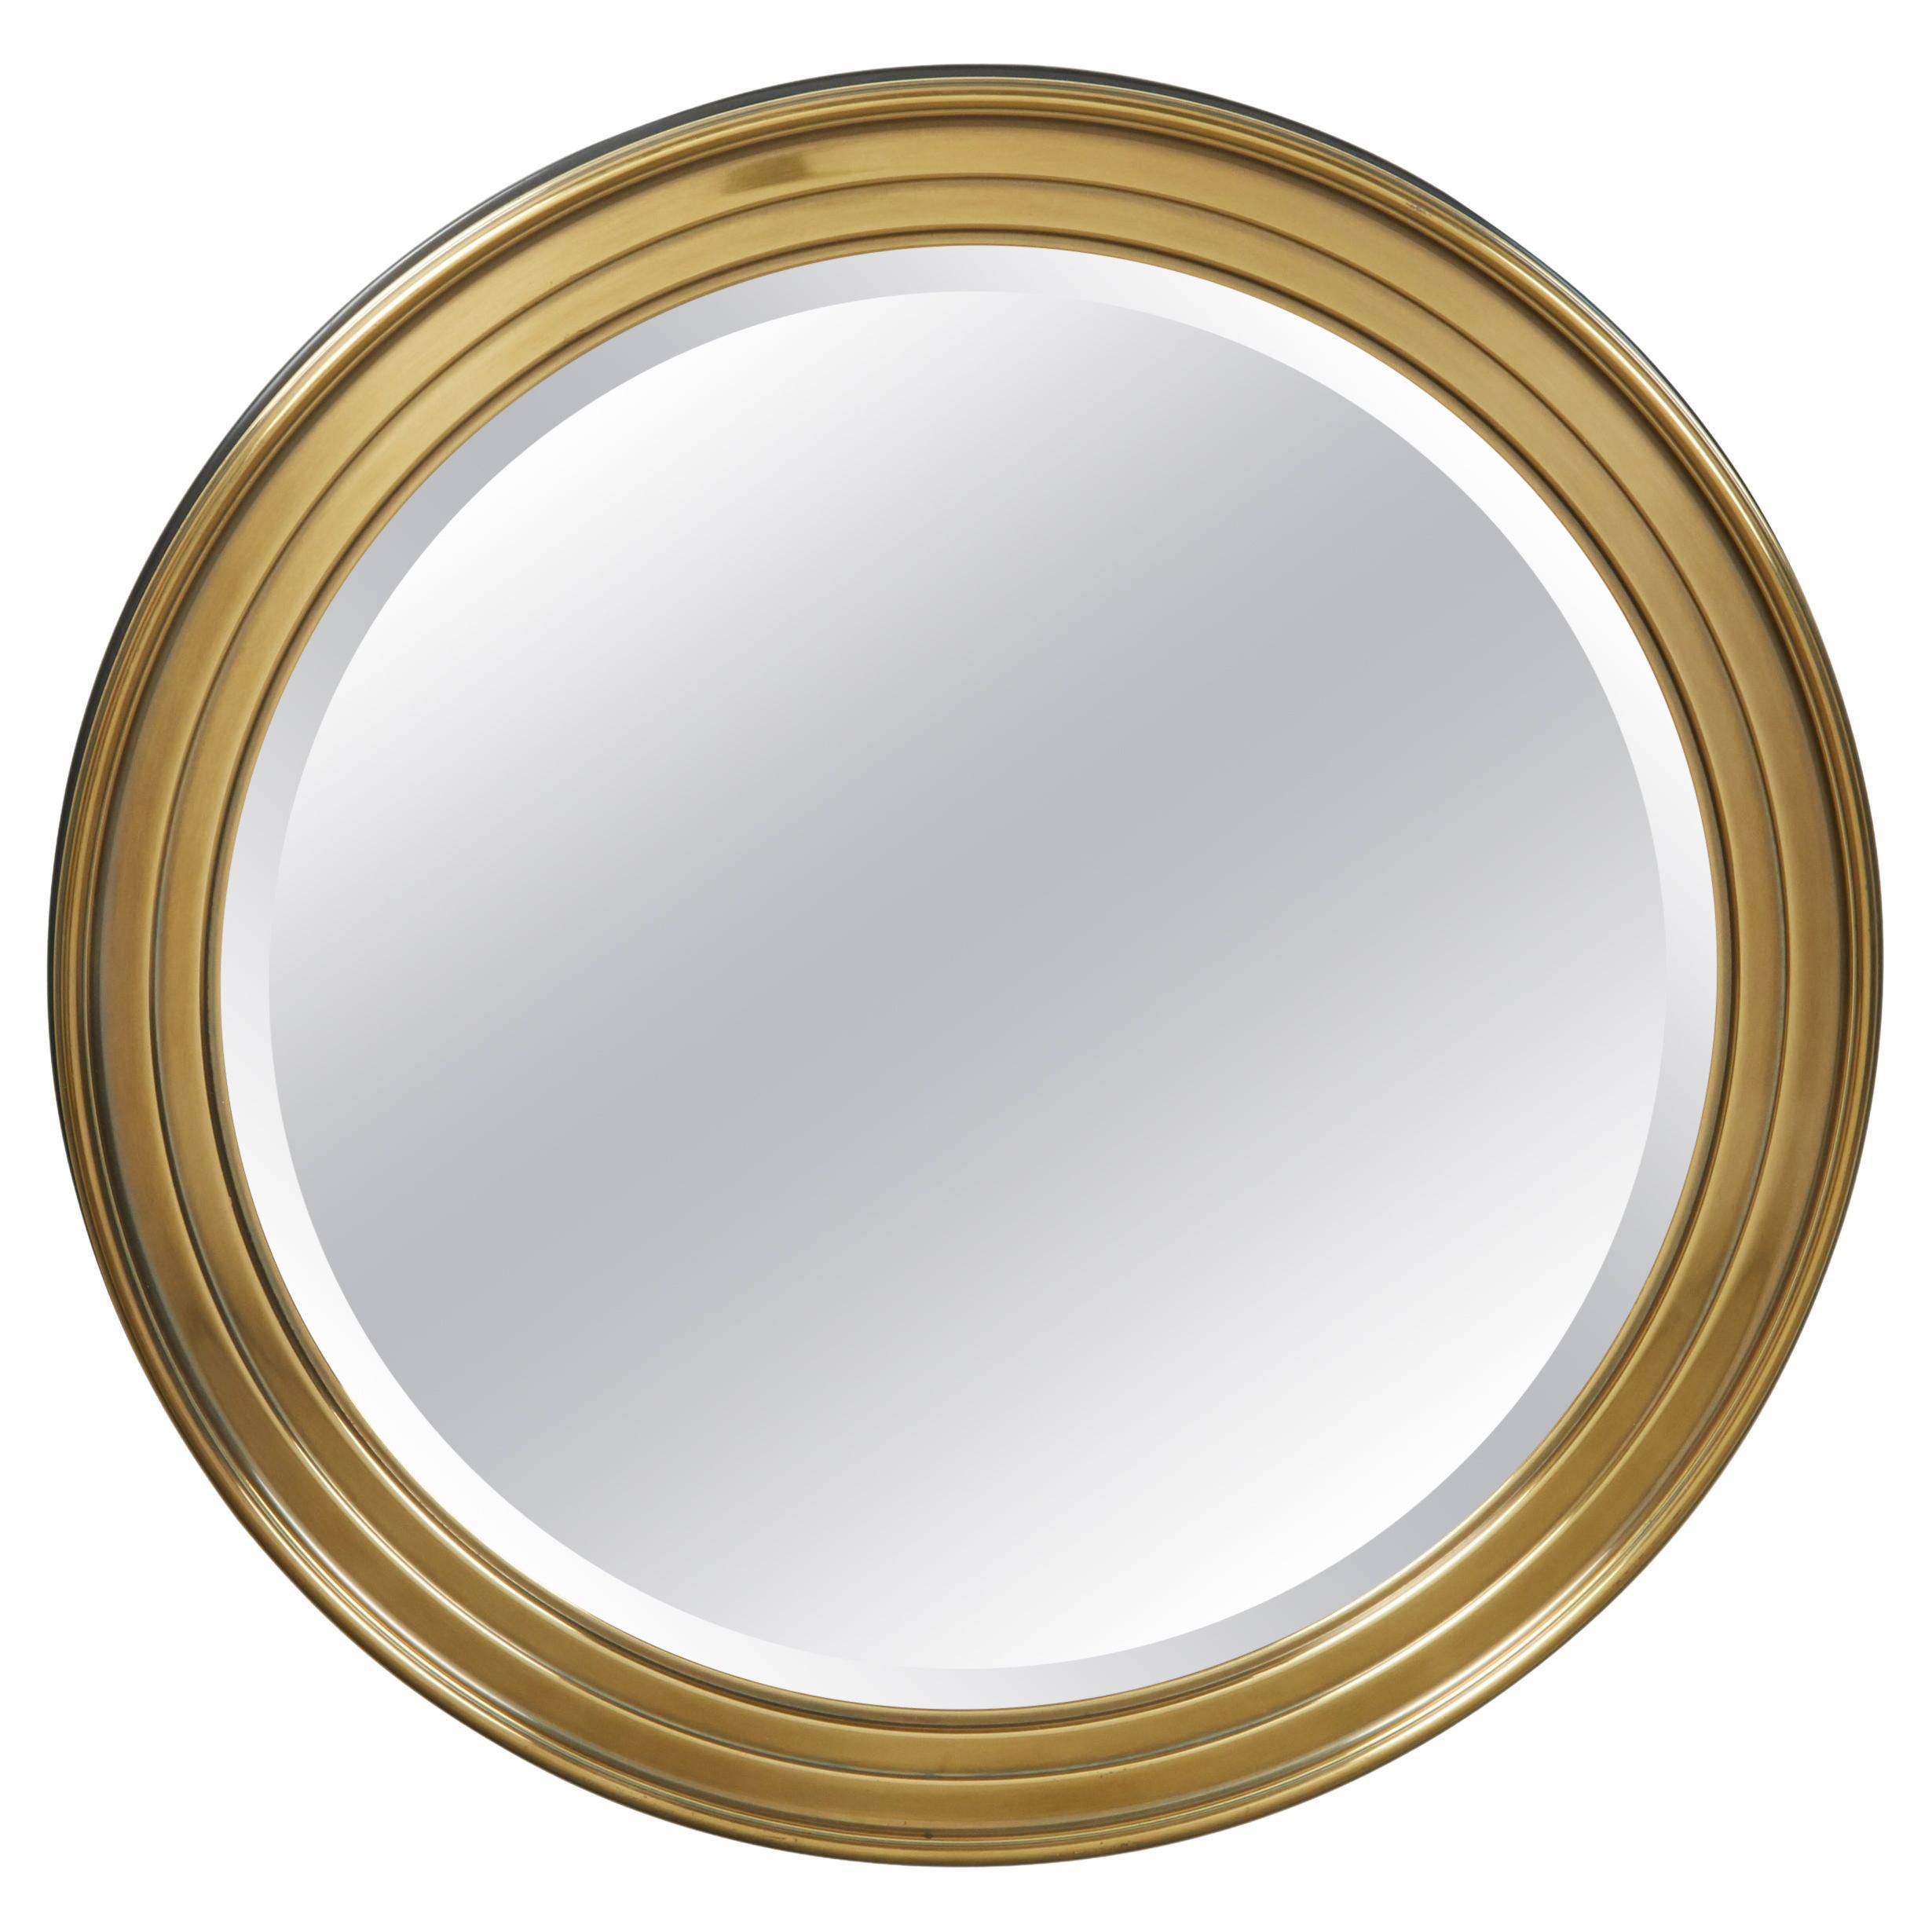 Midcentury Brass Circular Mirror with Stepped Frame and Beveled Edge For Sale